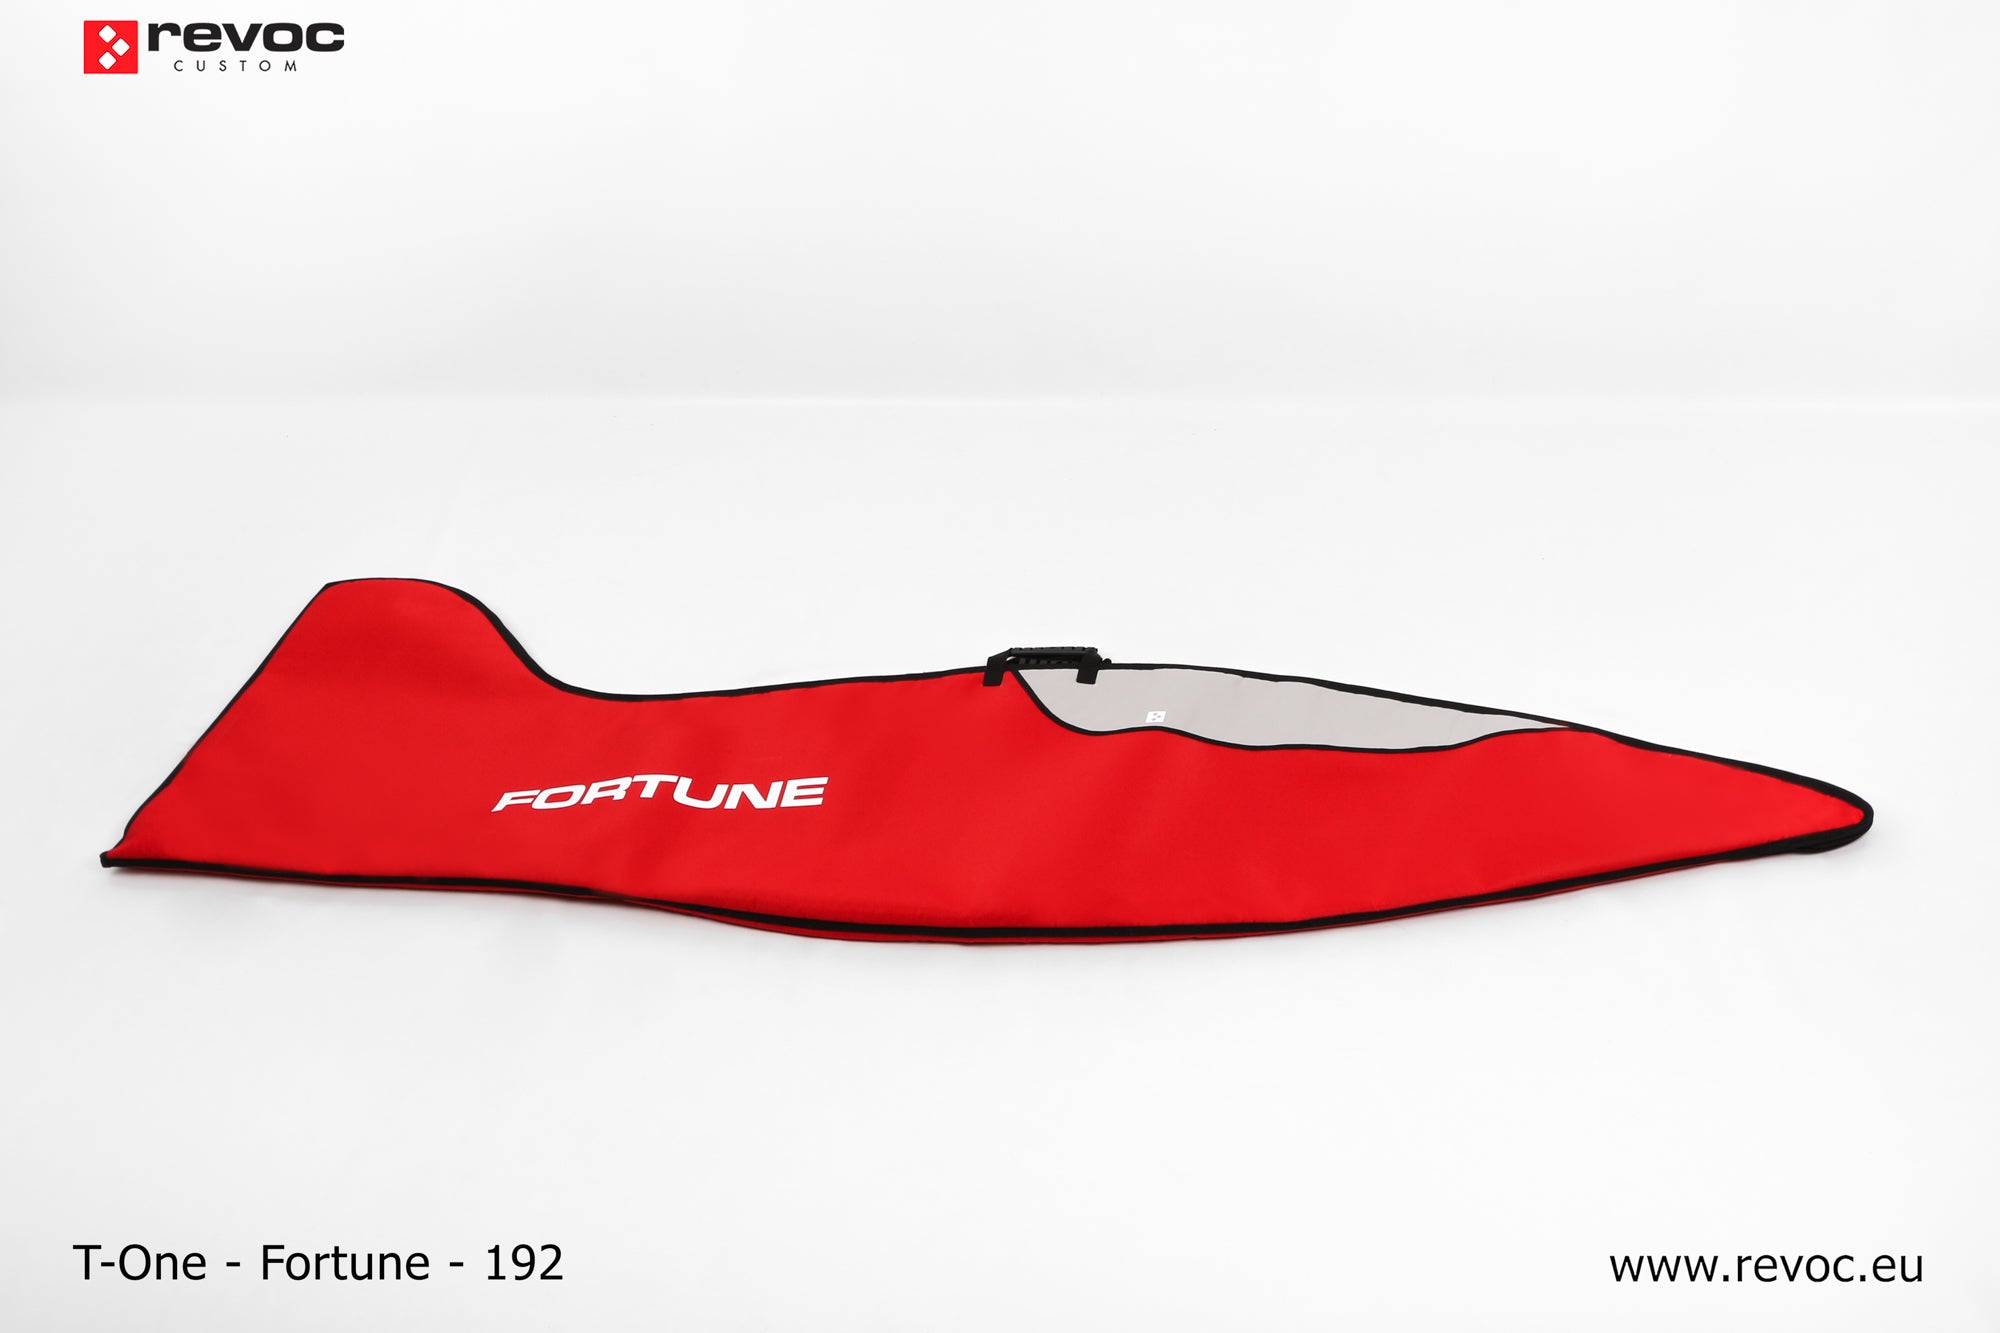 T1 Fortune Sport Jet Fuselage Soft Case from Revoc